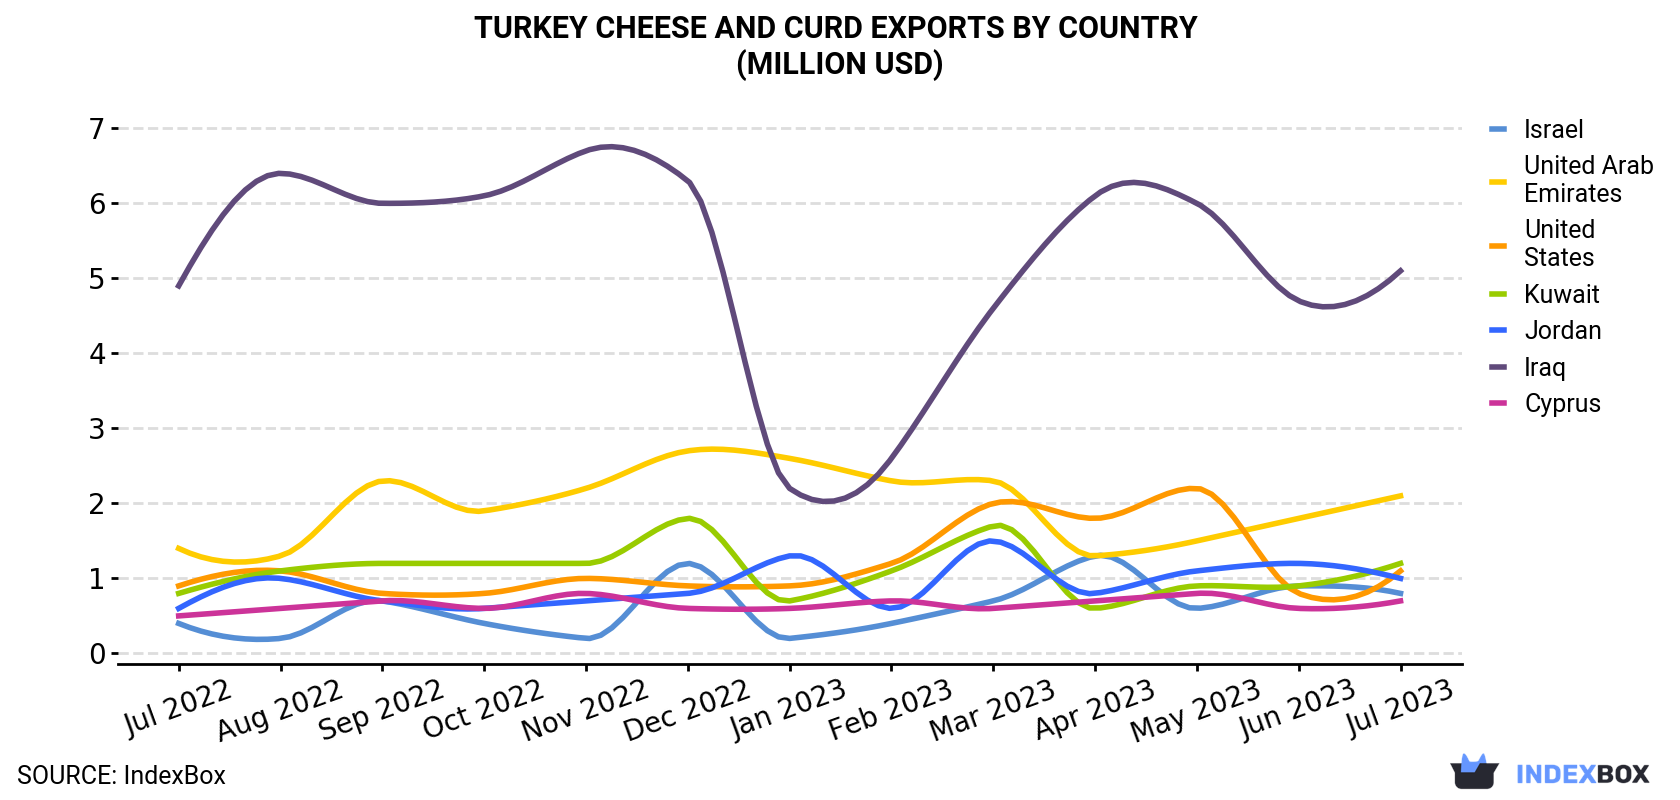 Turkey Cheese And Curd Exports By Country (Million USD)